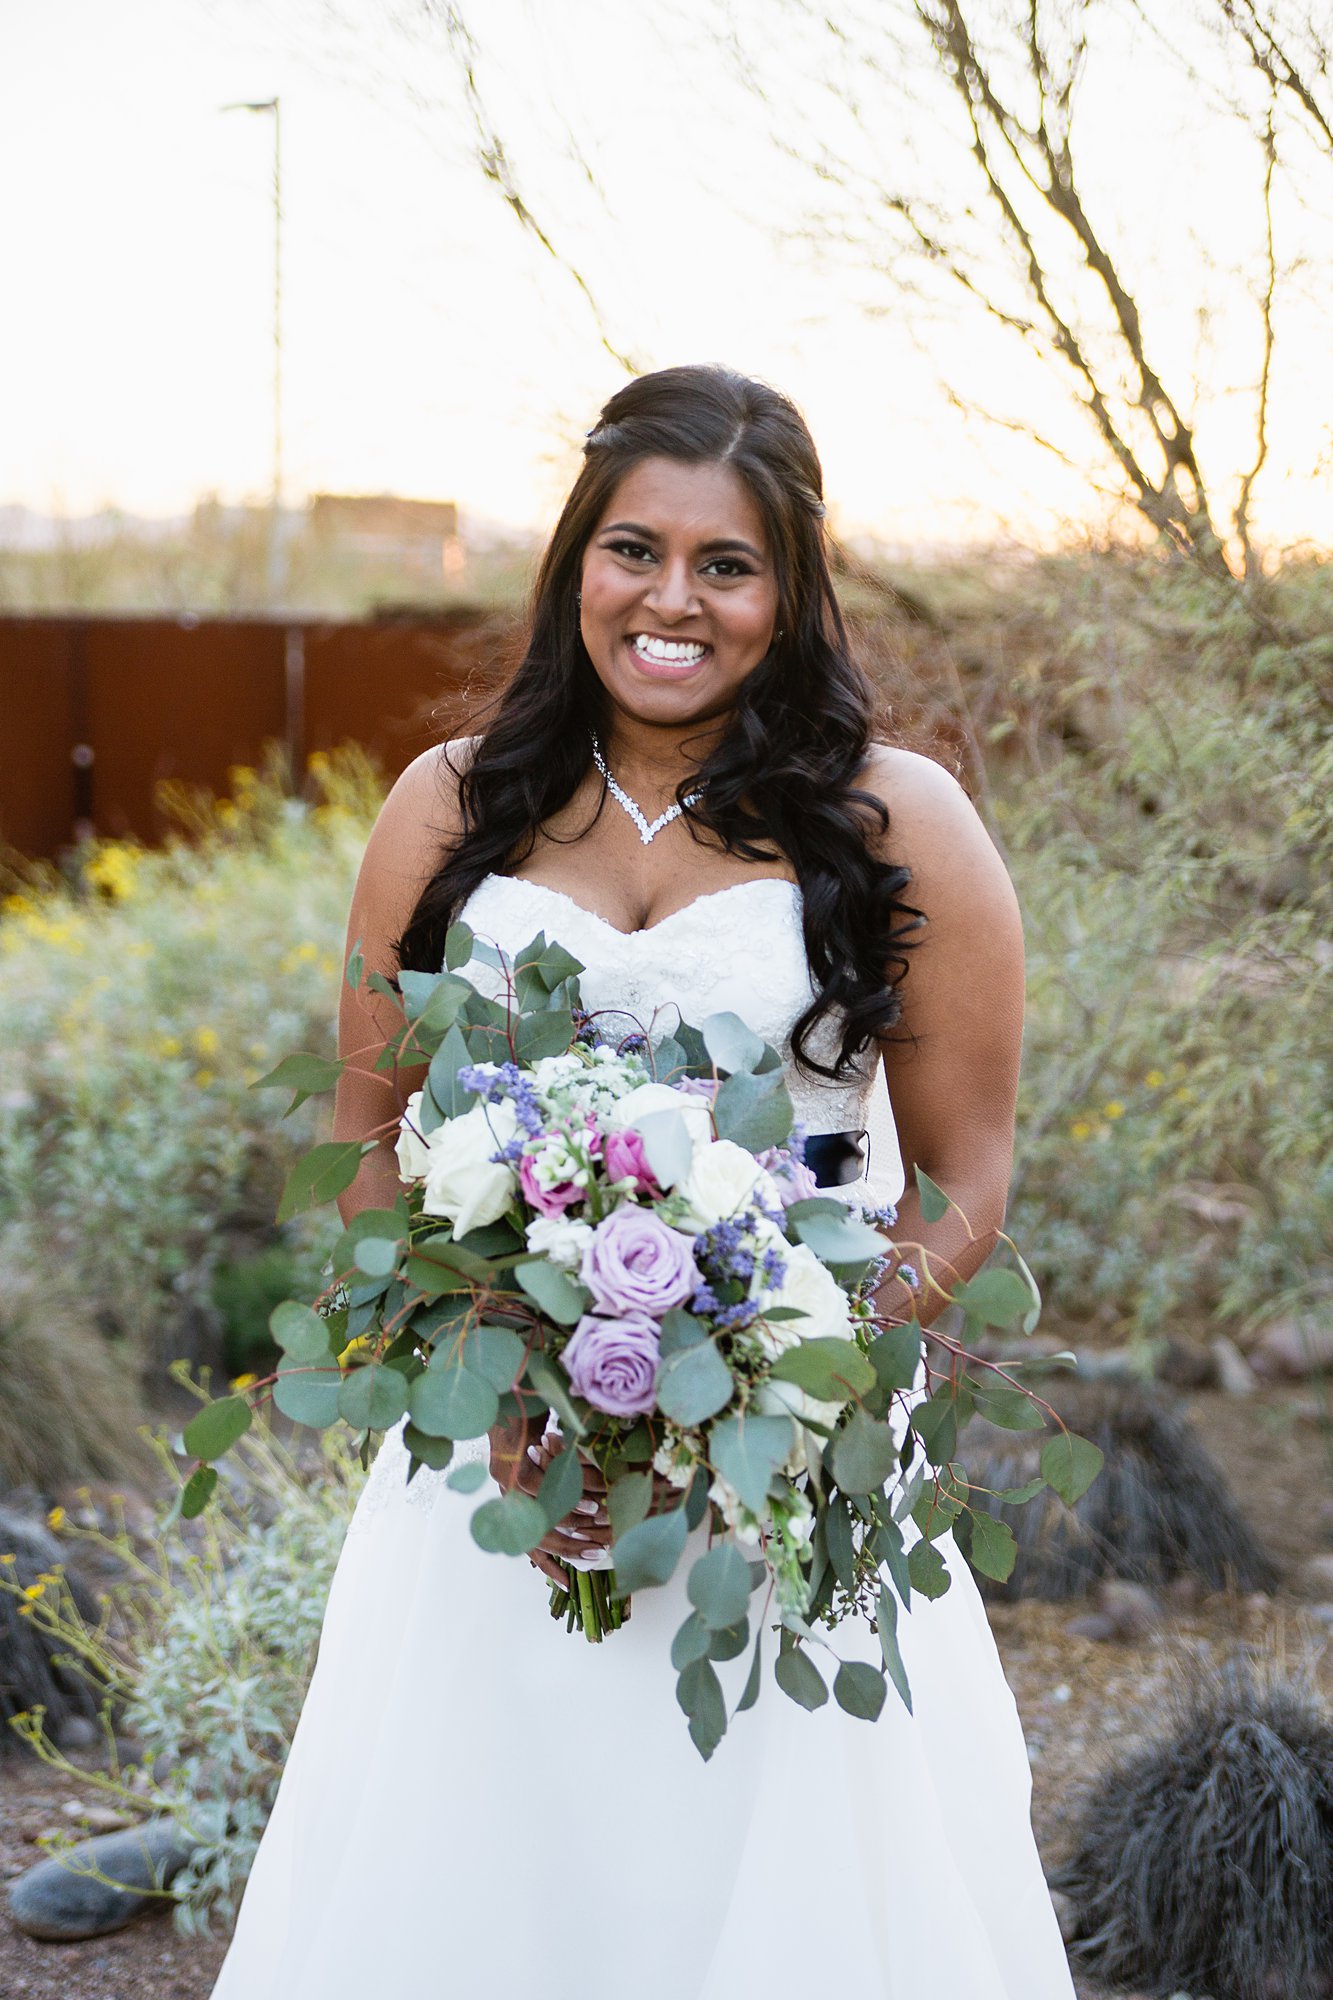 Bride holding lavender and white bouquet at her desert wedding by Phoenix wedding photographer PMA Photography.